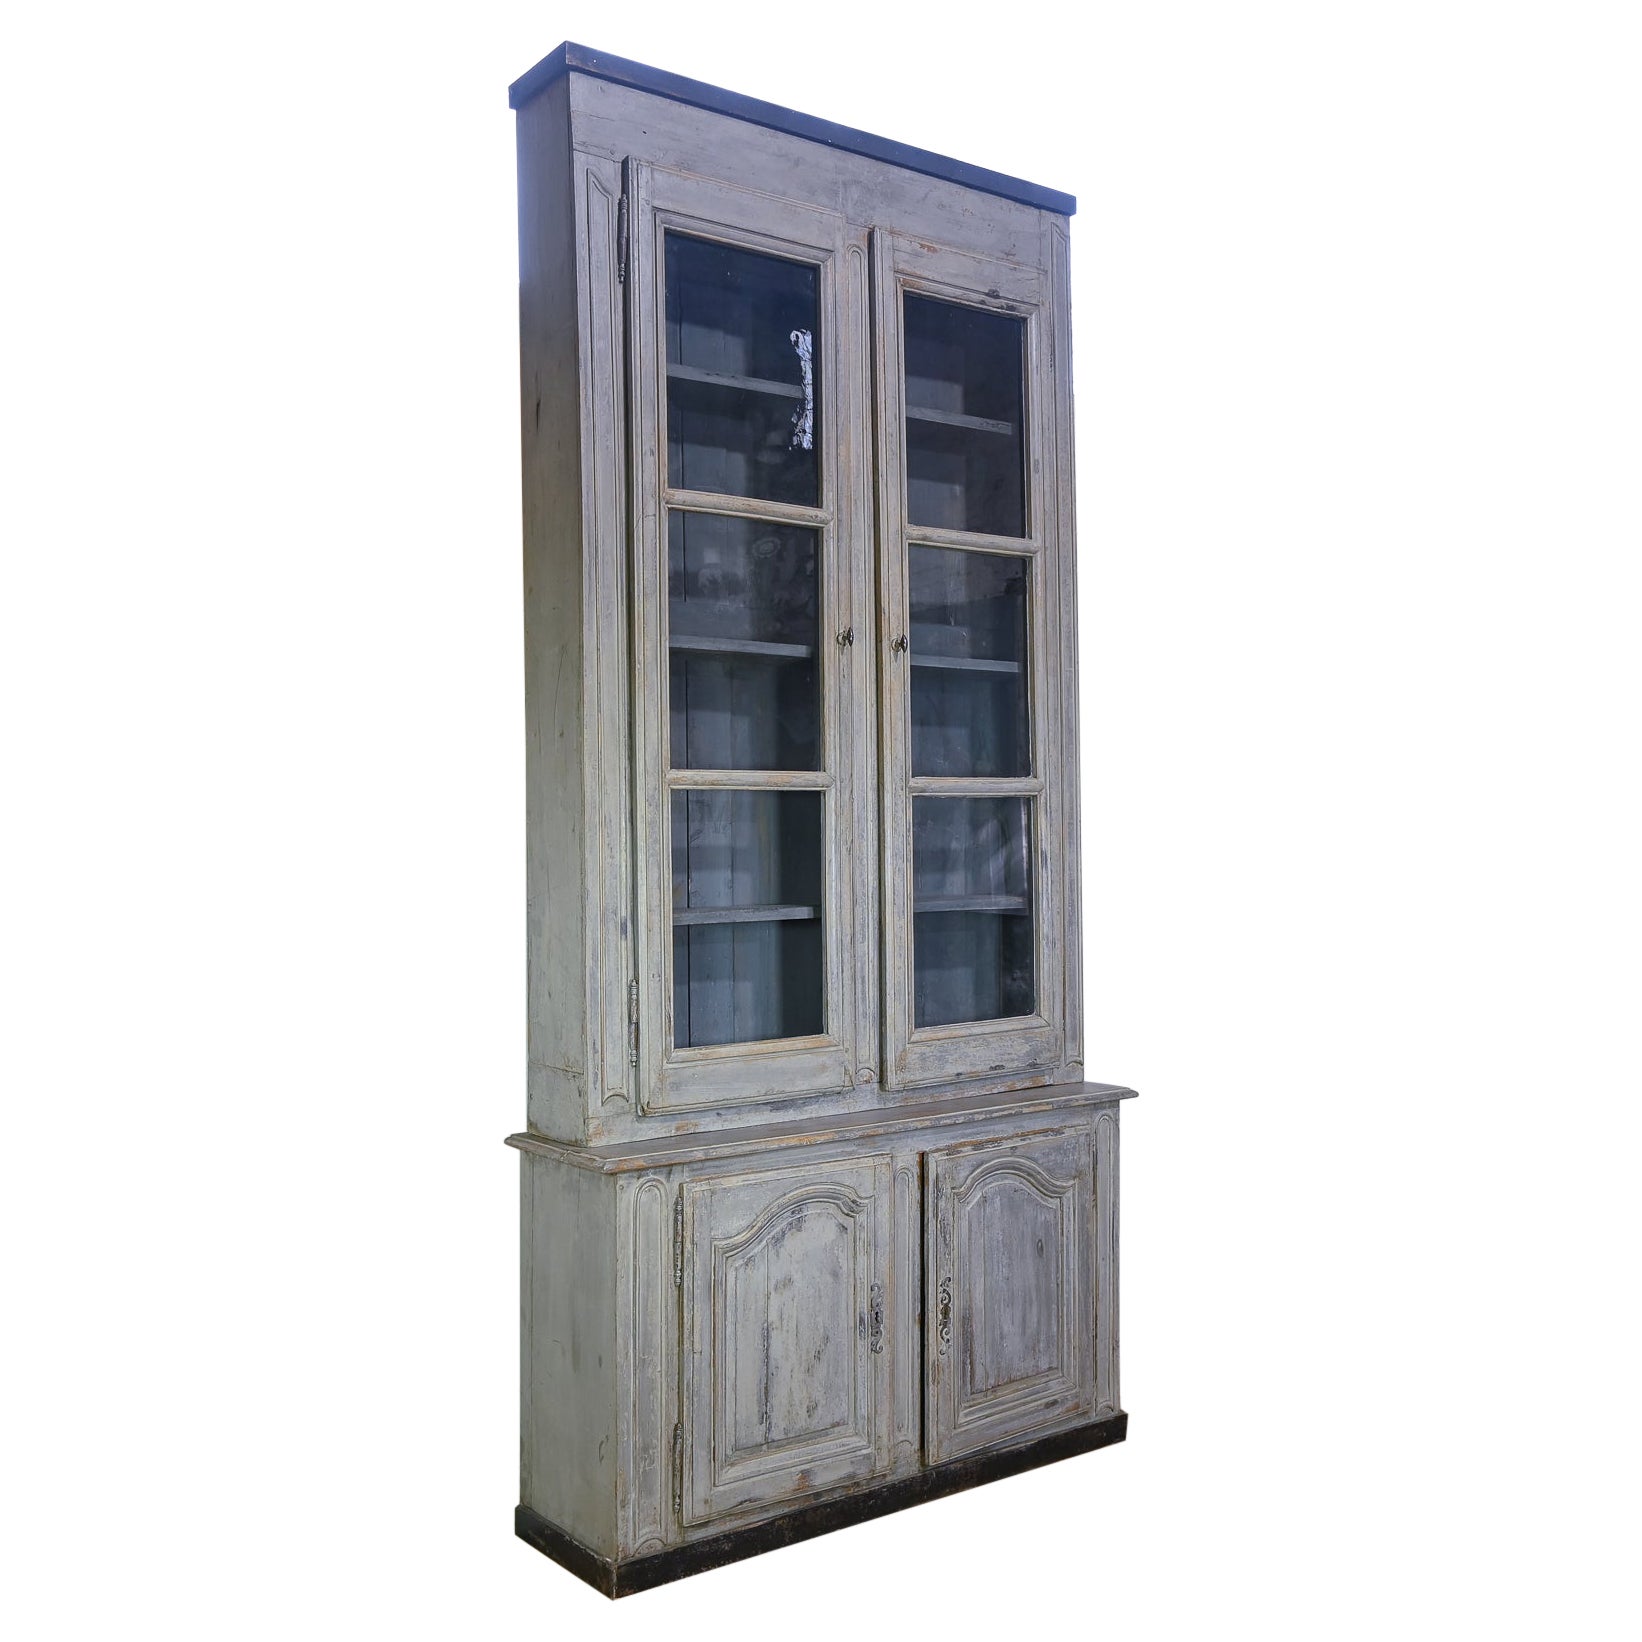 Tall Early 19th Century French Painted Glazed Bibliothèque, Bookcase